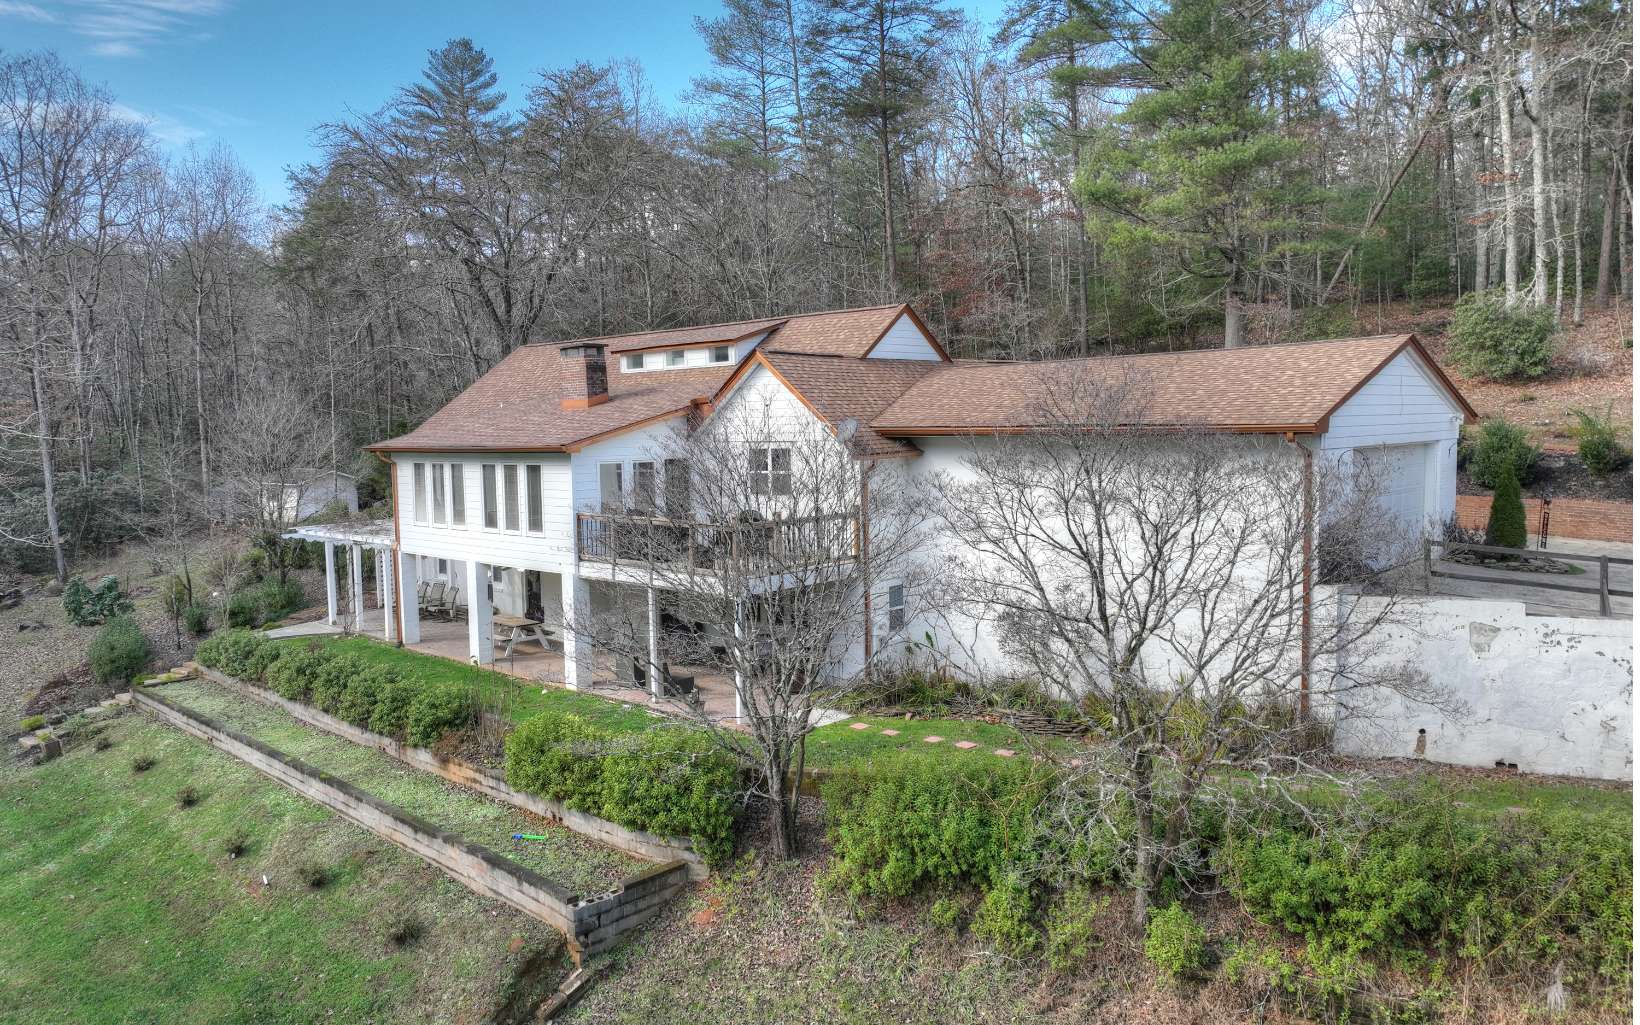 "European Farmhouse Feel" in the Mountains featuring almost 5,000 Sq Ft....."Built to Last"- 4-Sided "White" Brick w/Craftsman Accents on BIG Acreage (9.3 Acres). Beautifully Landscaped & Designed w/Terraces (Front & Back). 528' of "Cascading" Little Rose CREEK Frontage w/Shoreline Gazebo, Firepit & Pedestrian Bridge to access Your Acreage Across the Creek. WIDE OPEN Floor Plan w/Shiplap Walls & "Fossilized" Bamboo Floors. Impressive Kitchen w/Cathedral Ceiling (WOOD beams) Wall Ovens, Solid Surface Counters, Gas Cooktop w/Pot Filler & Huge Entertainment Island w/seating for 6."Centerpiece" Brick Fireplace between Living Rm & Sun Rm (Quality Crank-out Windows). Huge Dining Space w (2) "Bay Window" Extensions. Master Suite w/Trey Ceiling, Tile Showers (frameless door), Tile Floors, Double Vanity Marble Tops & Slipper Tub (Waterfall Faucet). Another Guest Bdrm Suite on Main Flr. 2 Car Attached Garage. Upper Floor w/Dormer Windows/Ceiling Lines, Open Sleeping Loft +(2) Guest Bdrms & Full Bath (Tile). "Walk Out" Terrace Level w/Bonus Rm, Billiard Area, 2nd FULL-SIZE Kitchen, (2nd) Huge Dining Area, (2) Guest Bdrms, Jack & Jill Bath (ALL Tile & Marble). "Paver" Patio w/Arbor & "Stone Slab" Steps Leading to Level Shoreline along Rose Creek. Long Driveway Approach for a Very Private Setting.Copper Soffit, Facia & Gutters